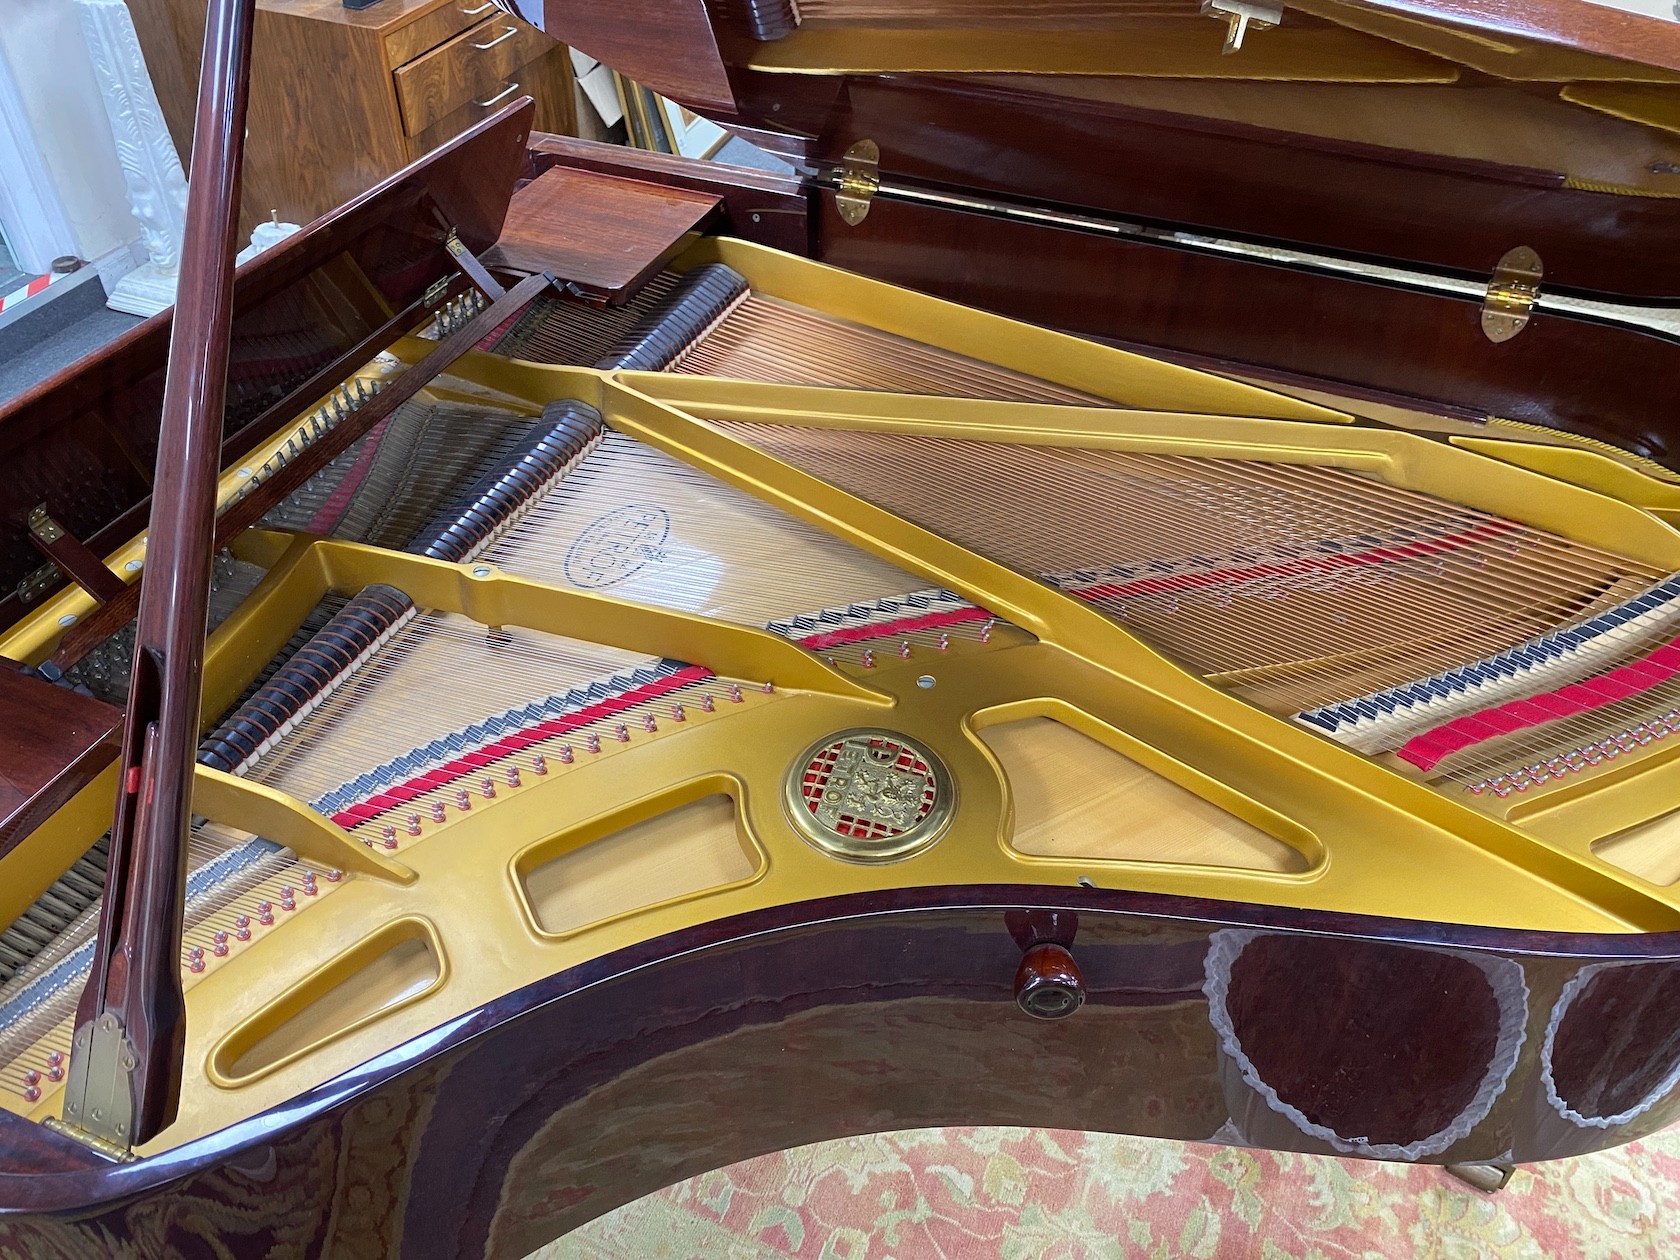 A Petrof 6ft 2in Model III grand piano, mahogany cased, serial number 513137 circa 1994.